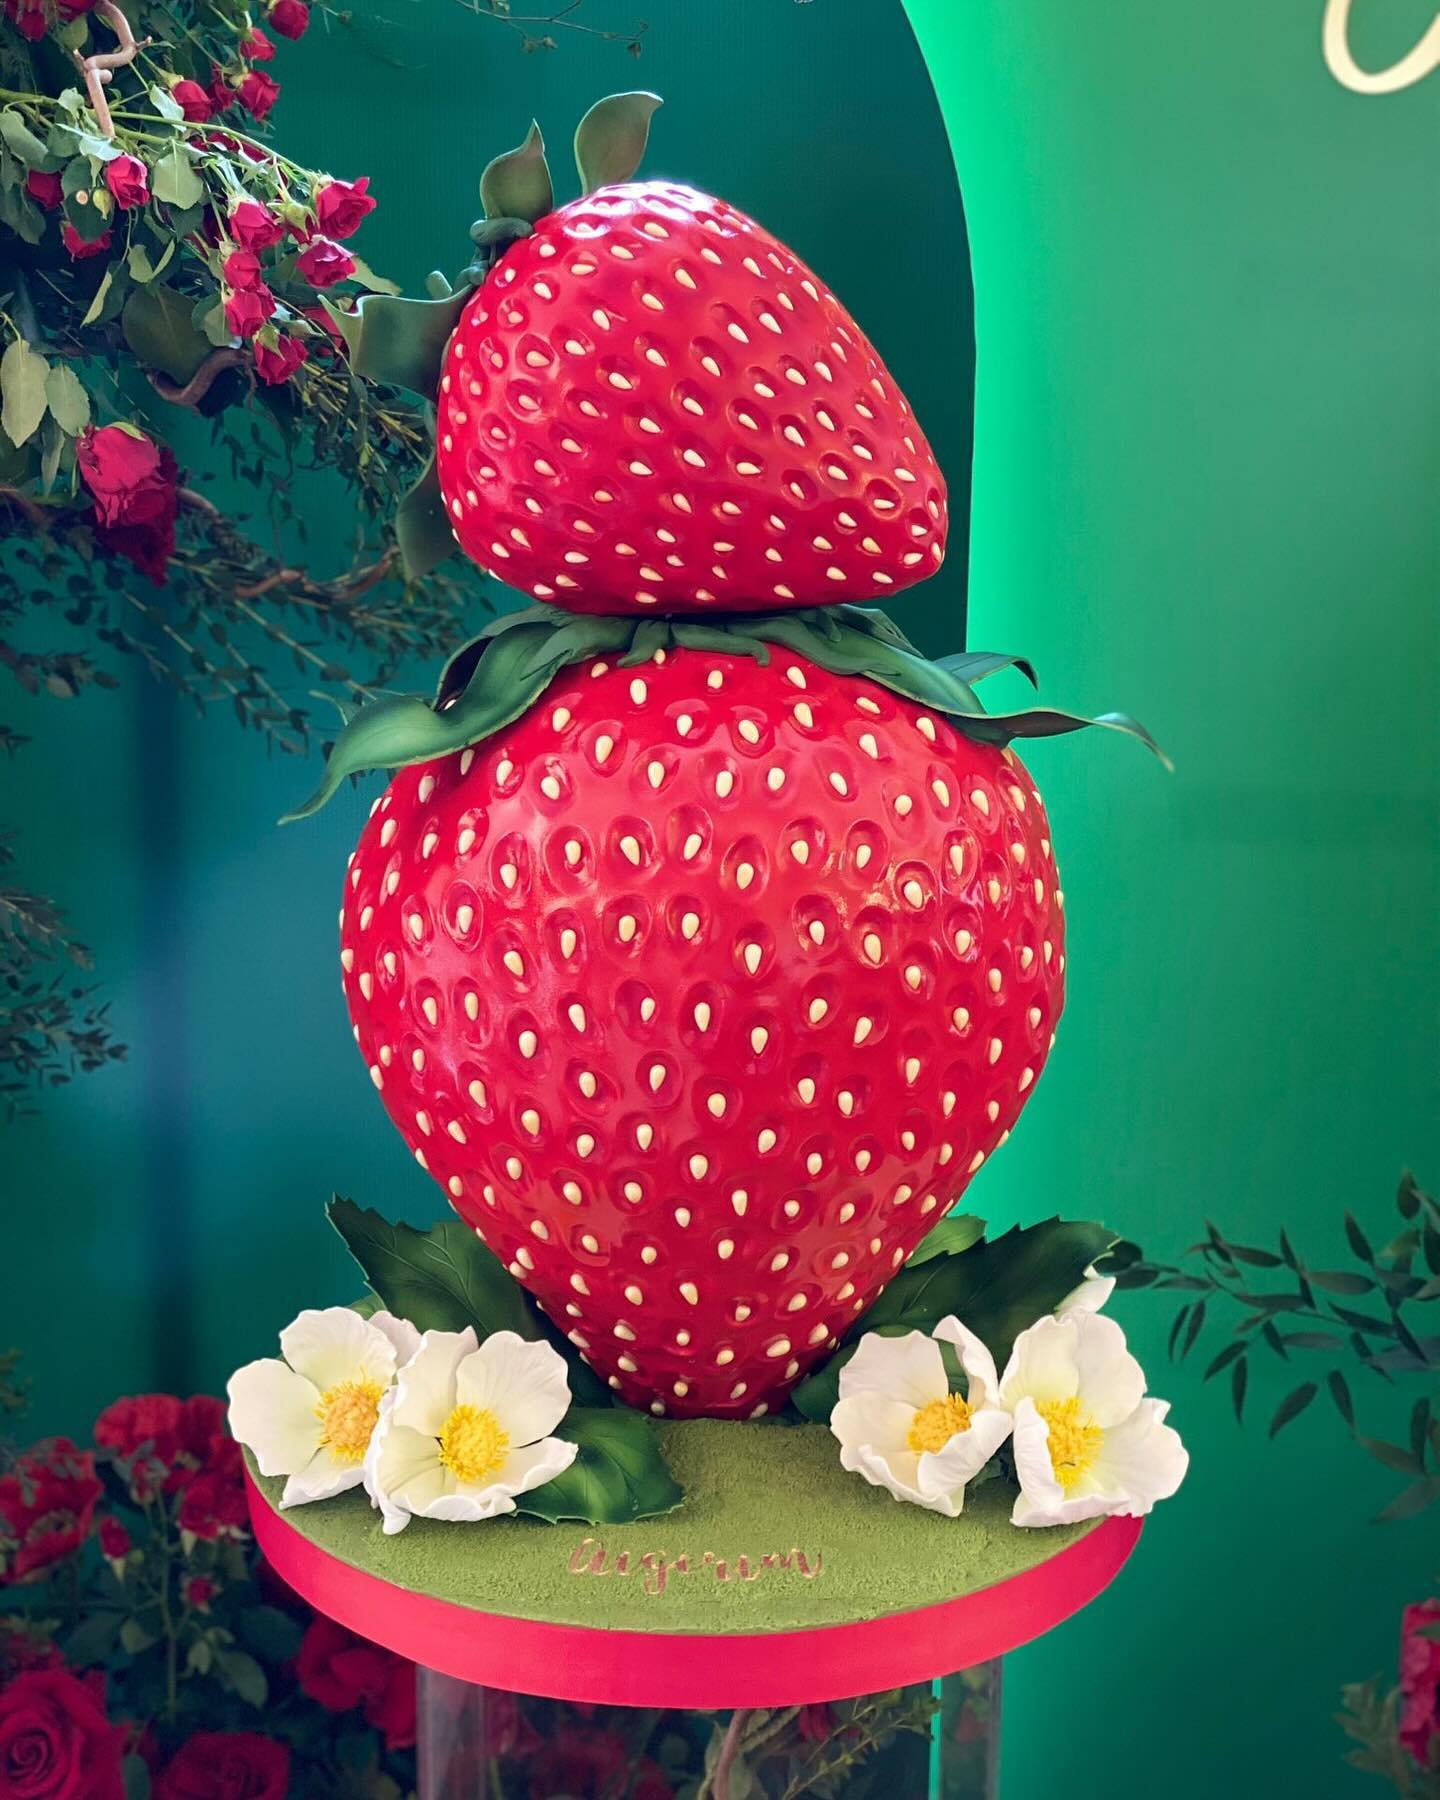 THE strawberry dream - One of our ultimate favourites 🍰🍓

Too good not to reshare! See the stories for more photos to see the scale.

.
#cake #cakeart #cakesculpture #strawberrycake #strawberry #giantcake #birthdaycake #events #luxuryevents #luxury